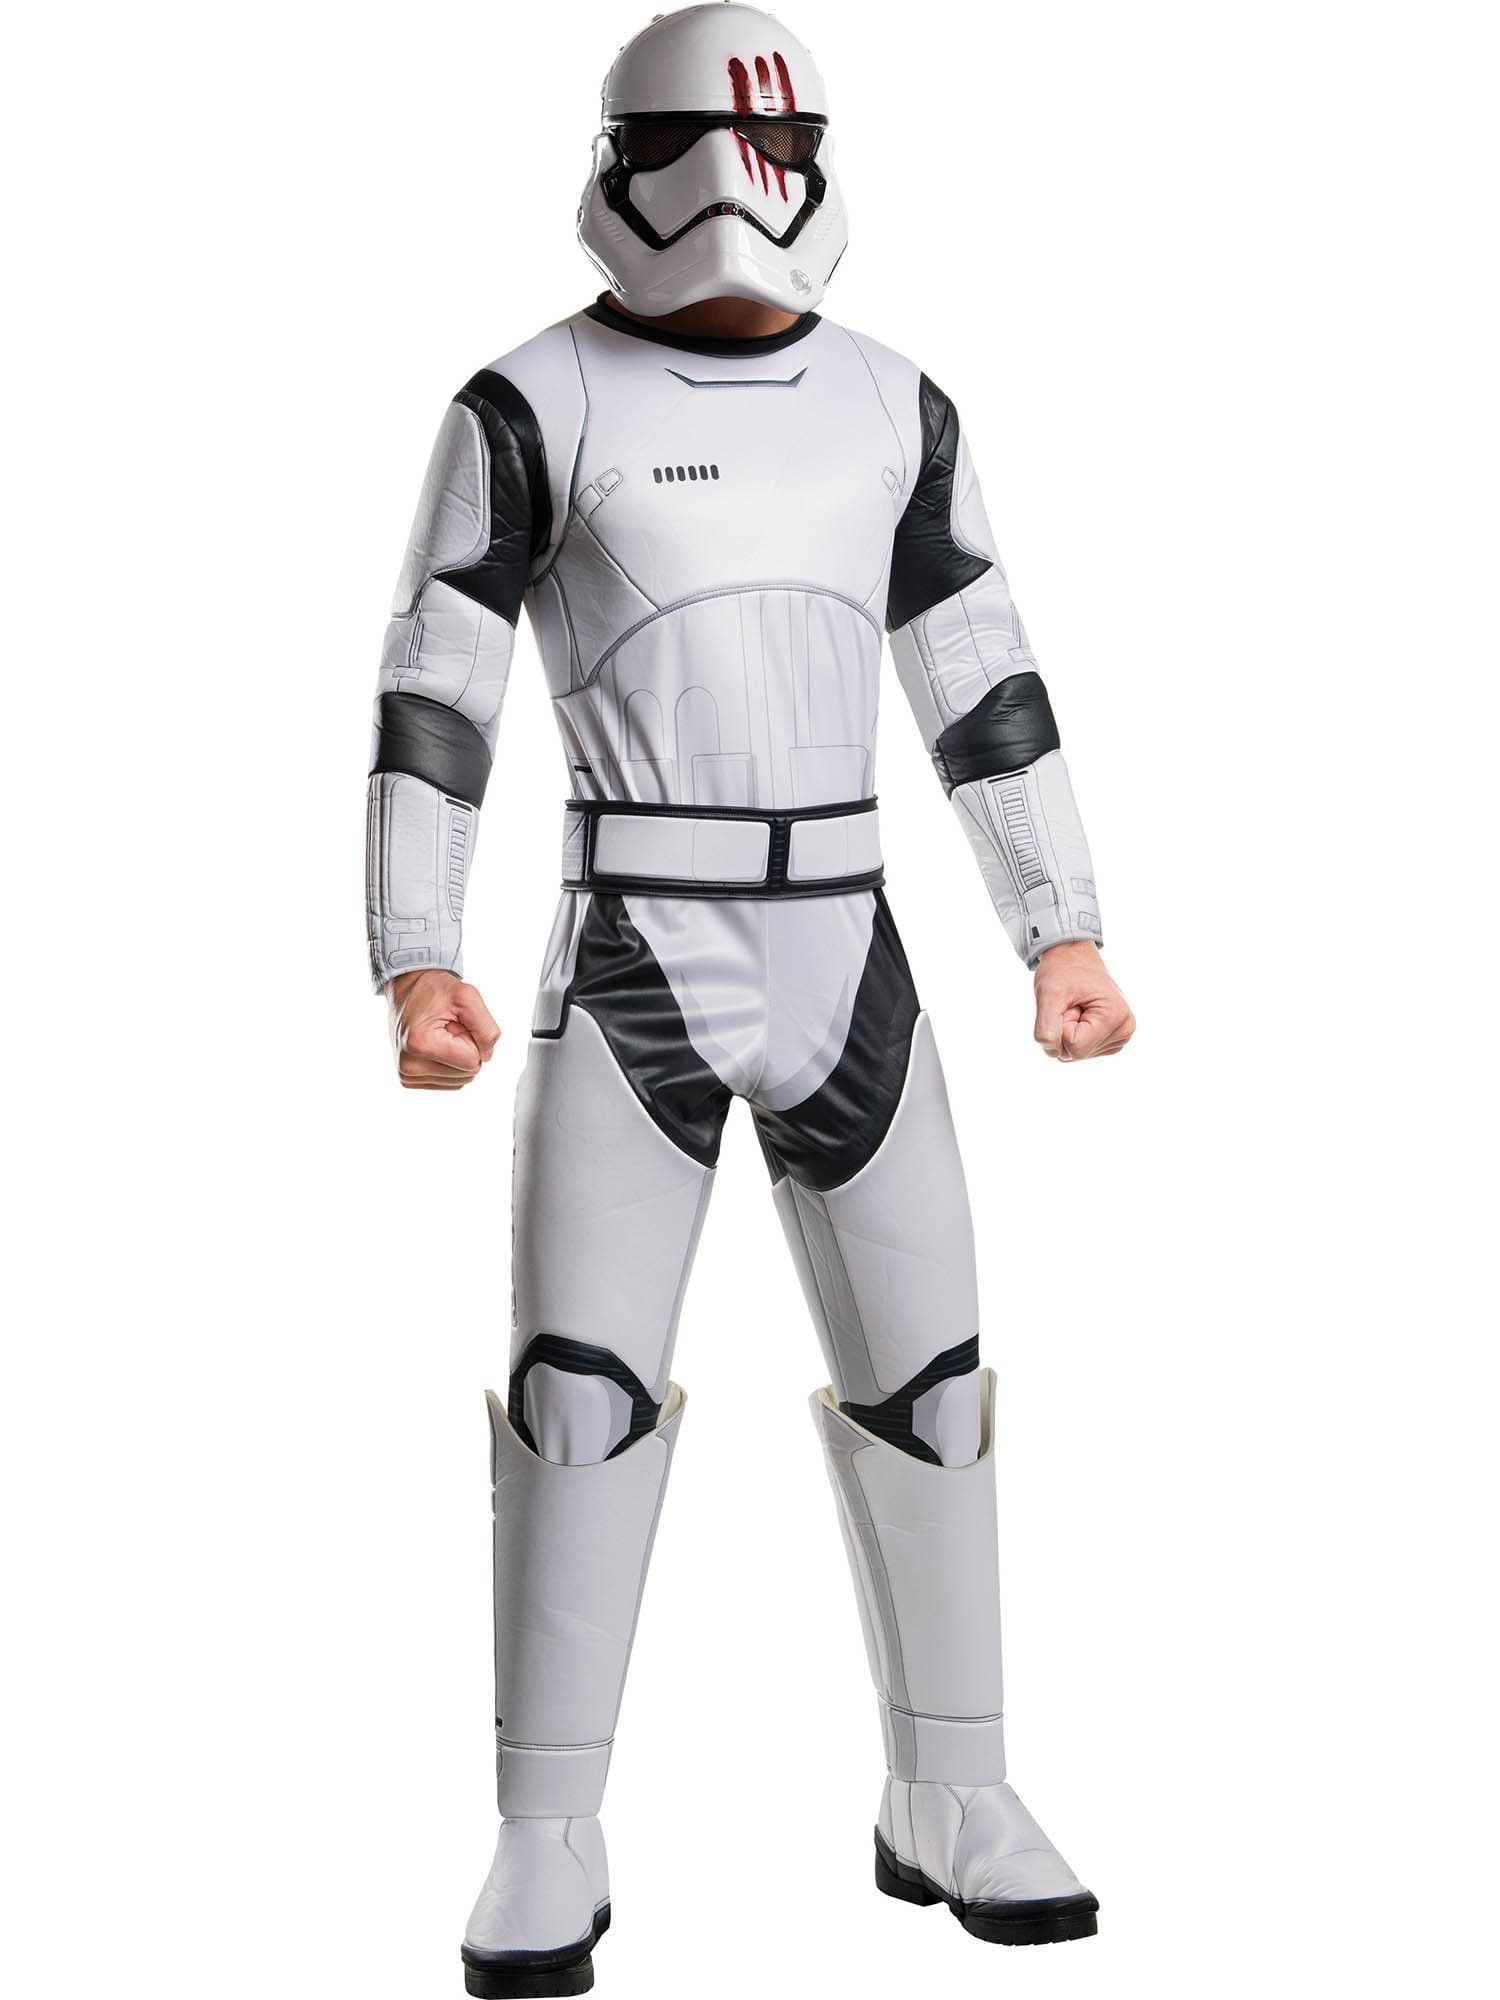 Adult The Force Awakens Finn Deluxe Costume - costumes.com